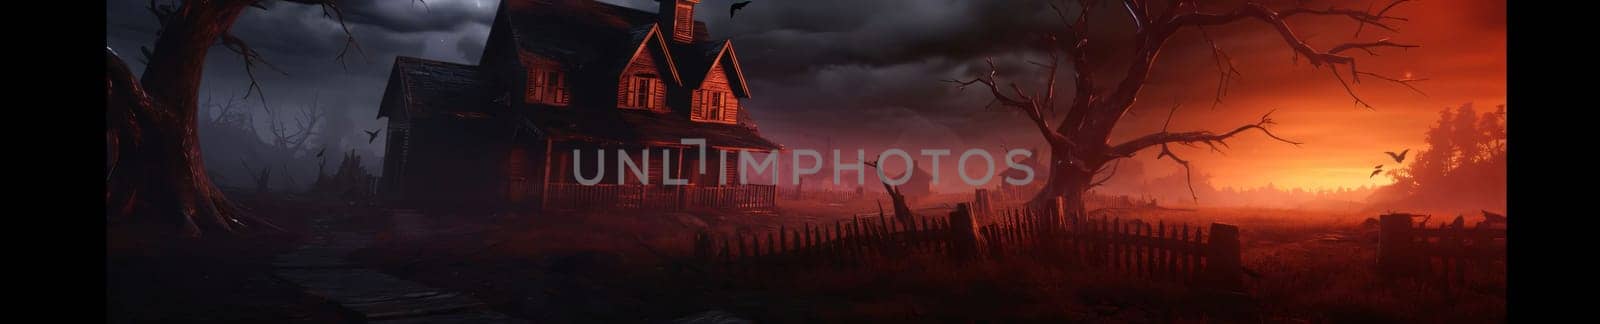 Halloween night landscape with old wooden house and trees. Halloween background by ThemesS